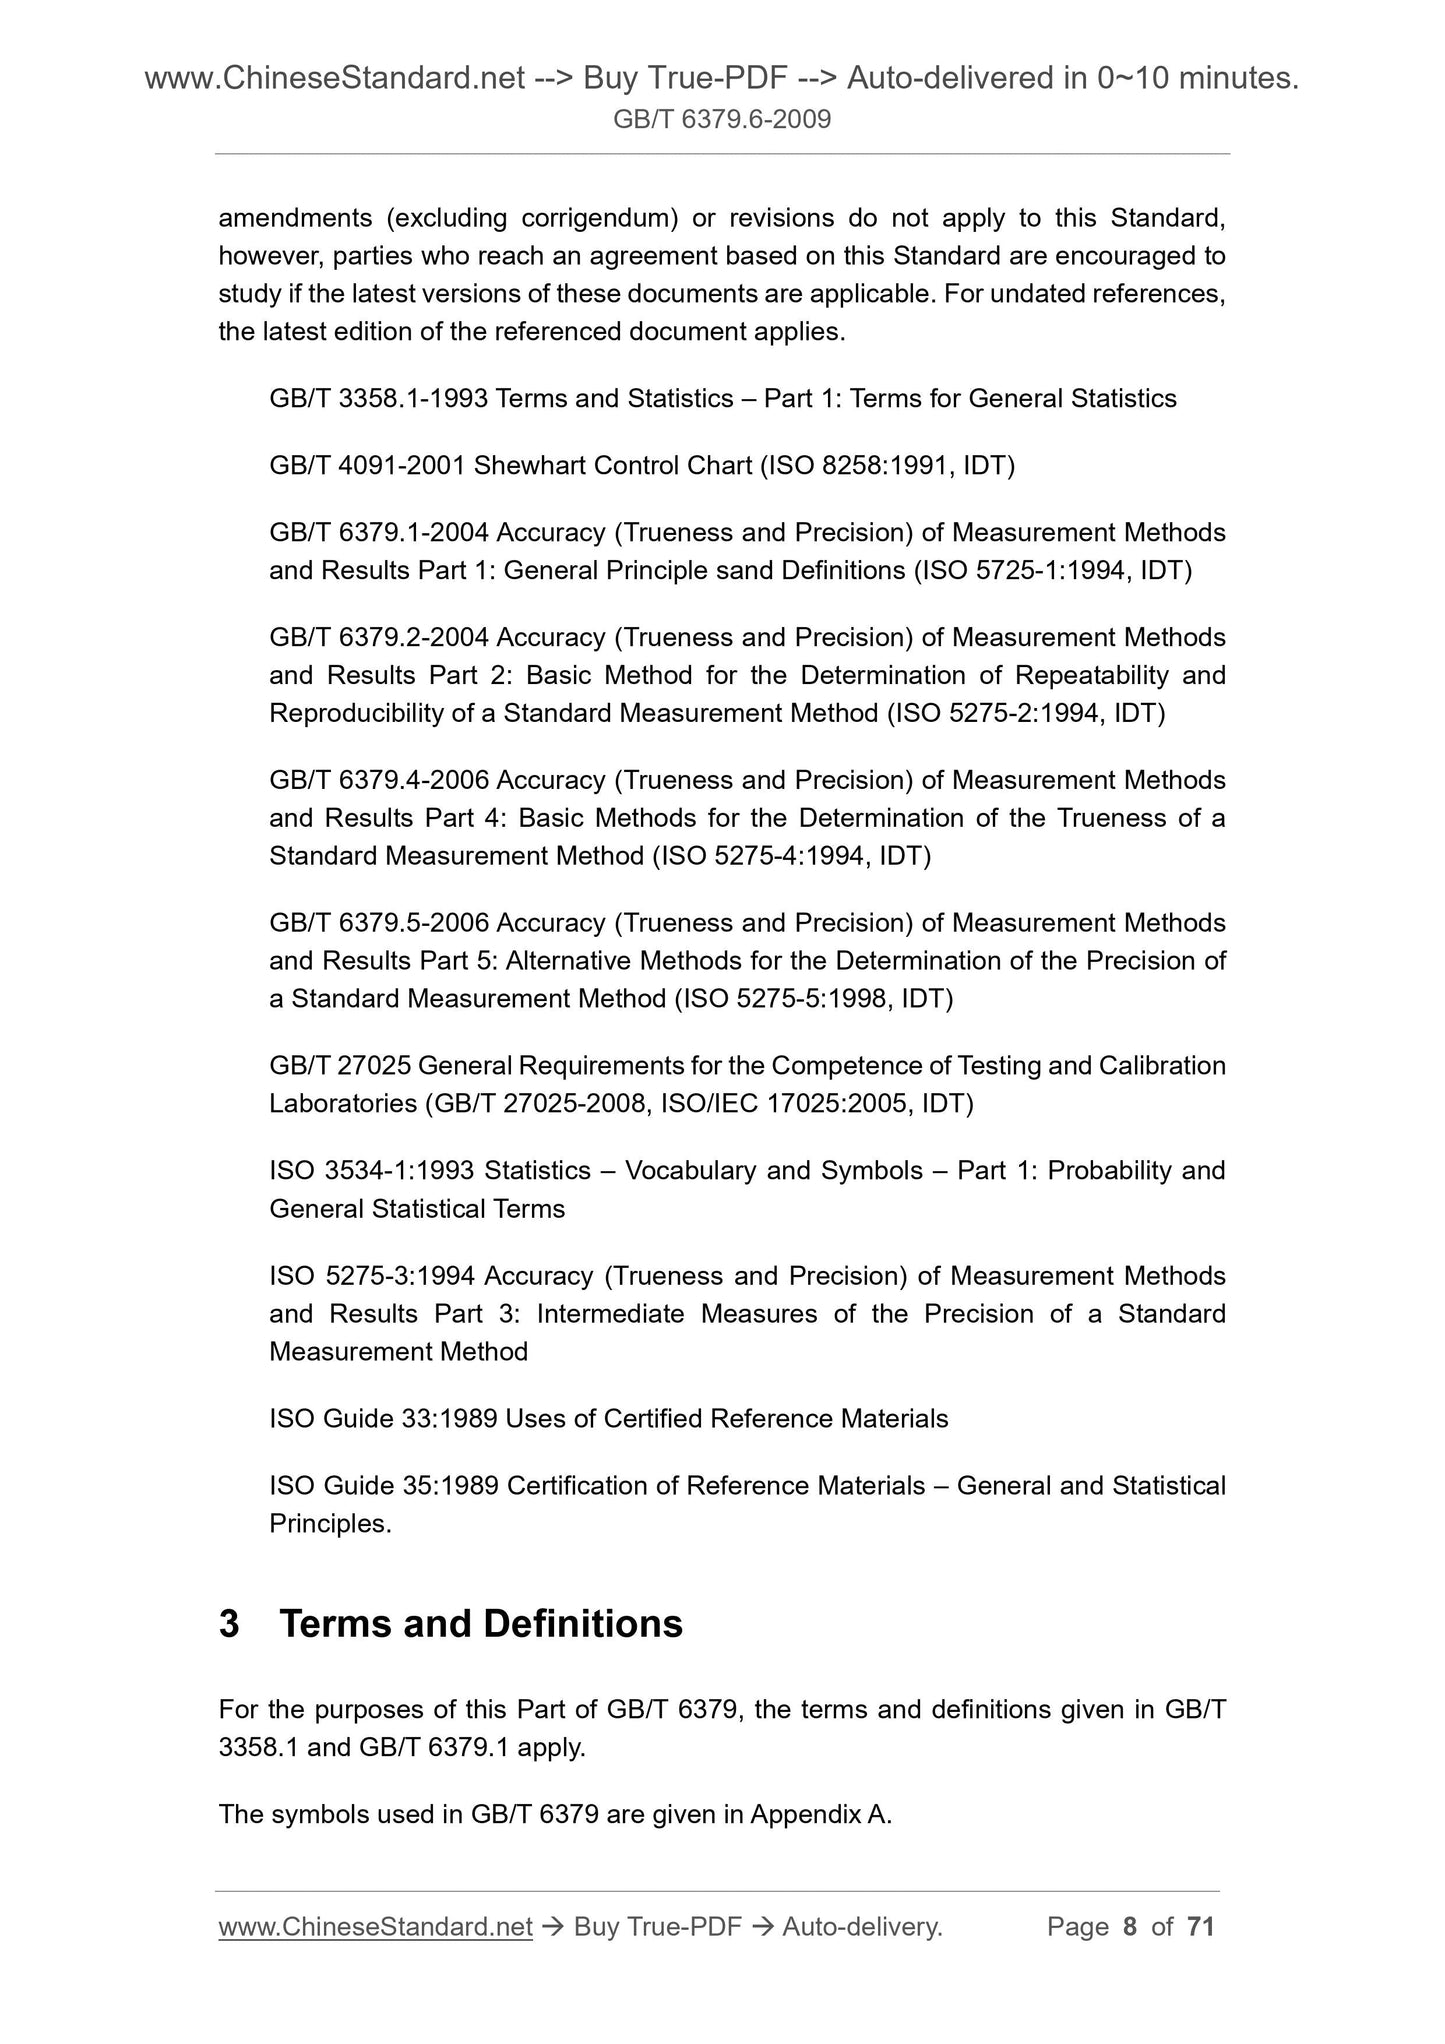 GB/T 6379.6-2009 Page 7